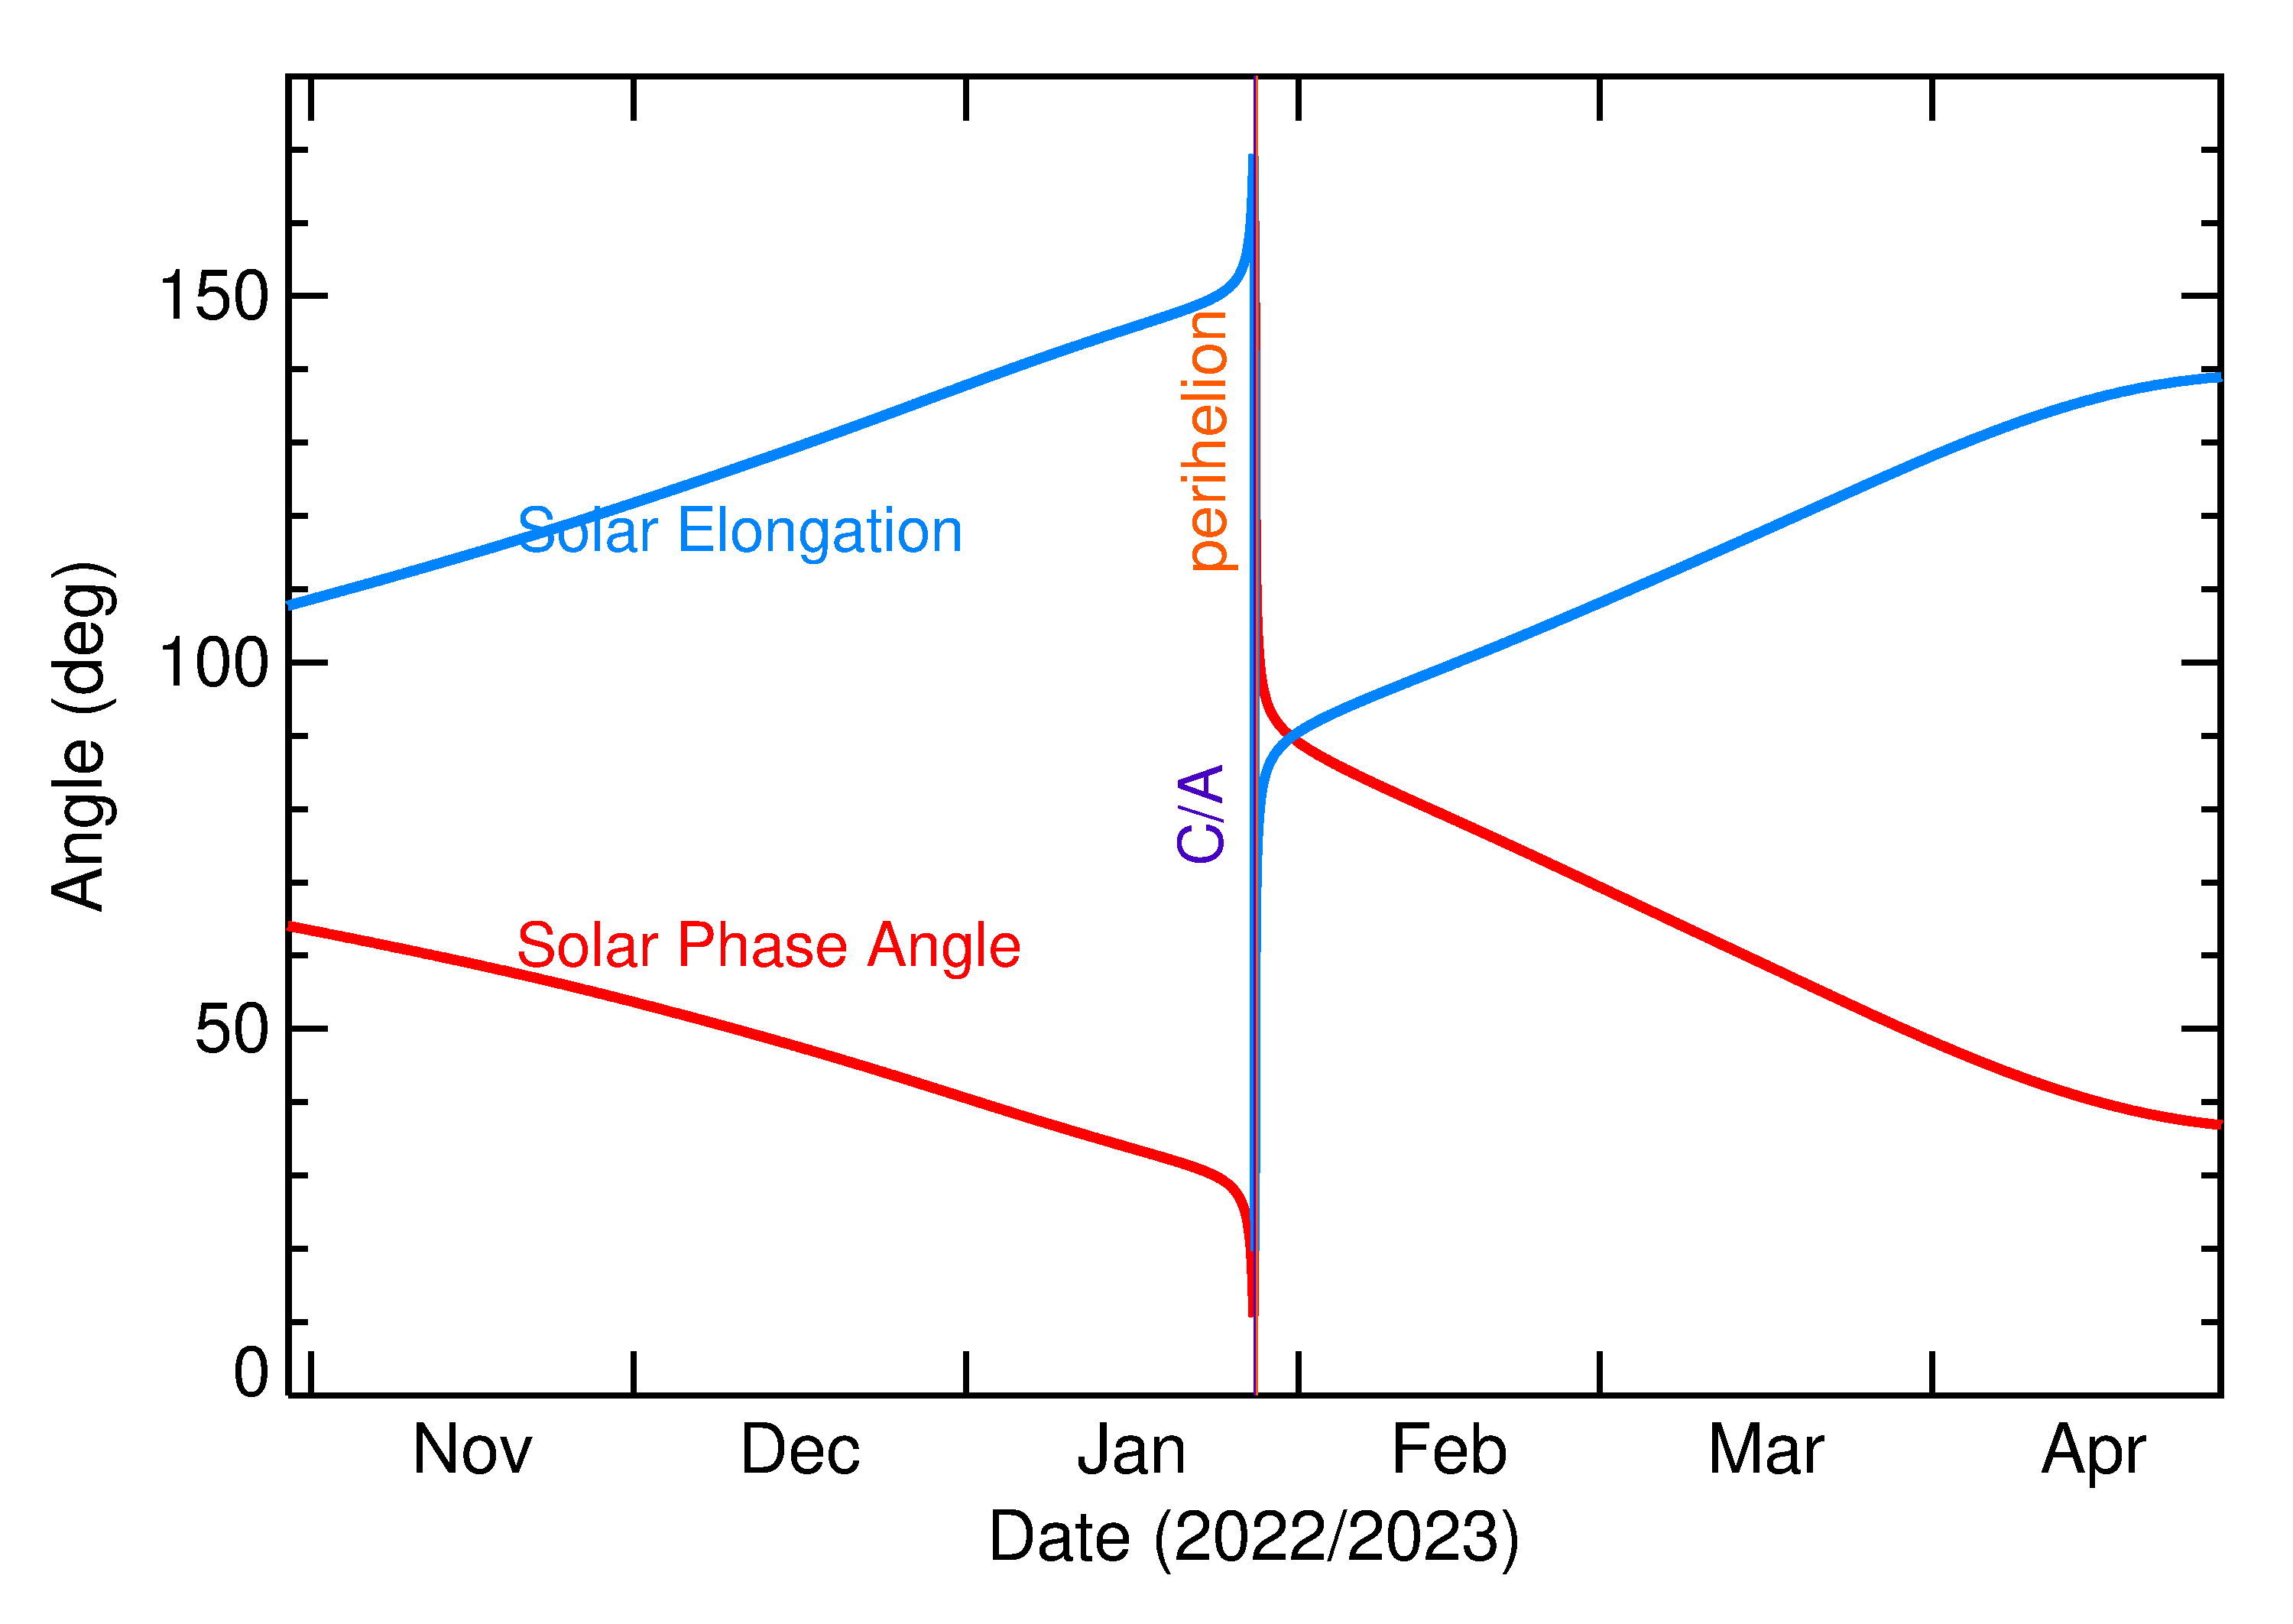 Solar Elongation and Solar Phase Angle of 2023 BU in the months around closest approach